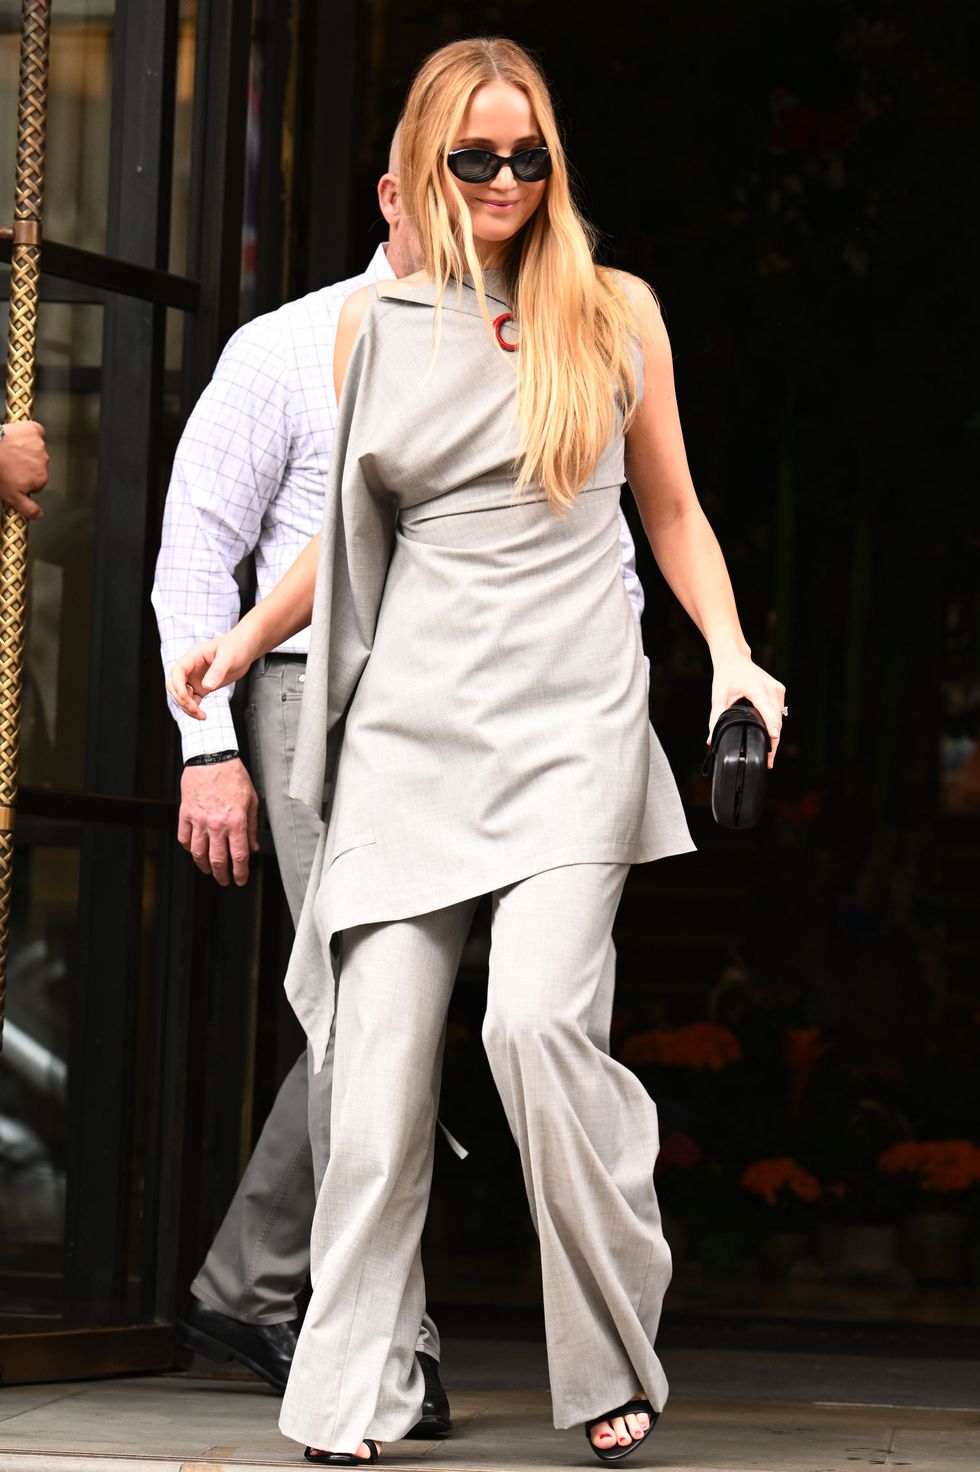 Jennifer Lawrence does 'quiet luxury' in a grey The Row outfit